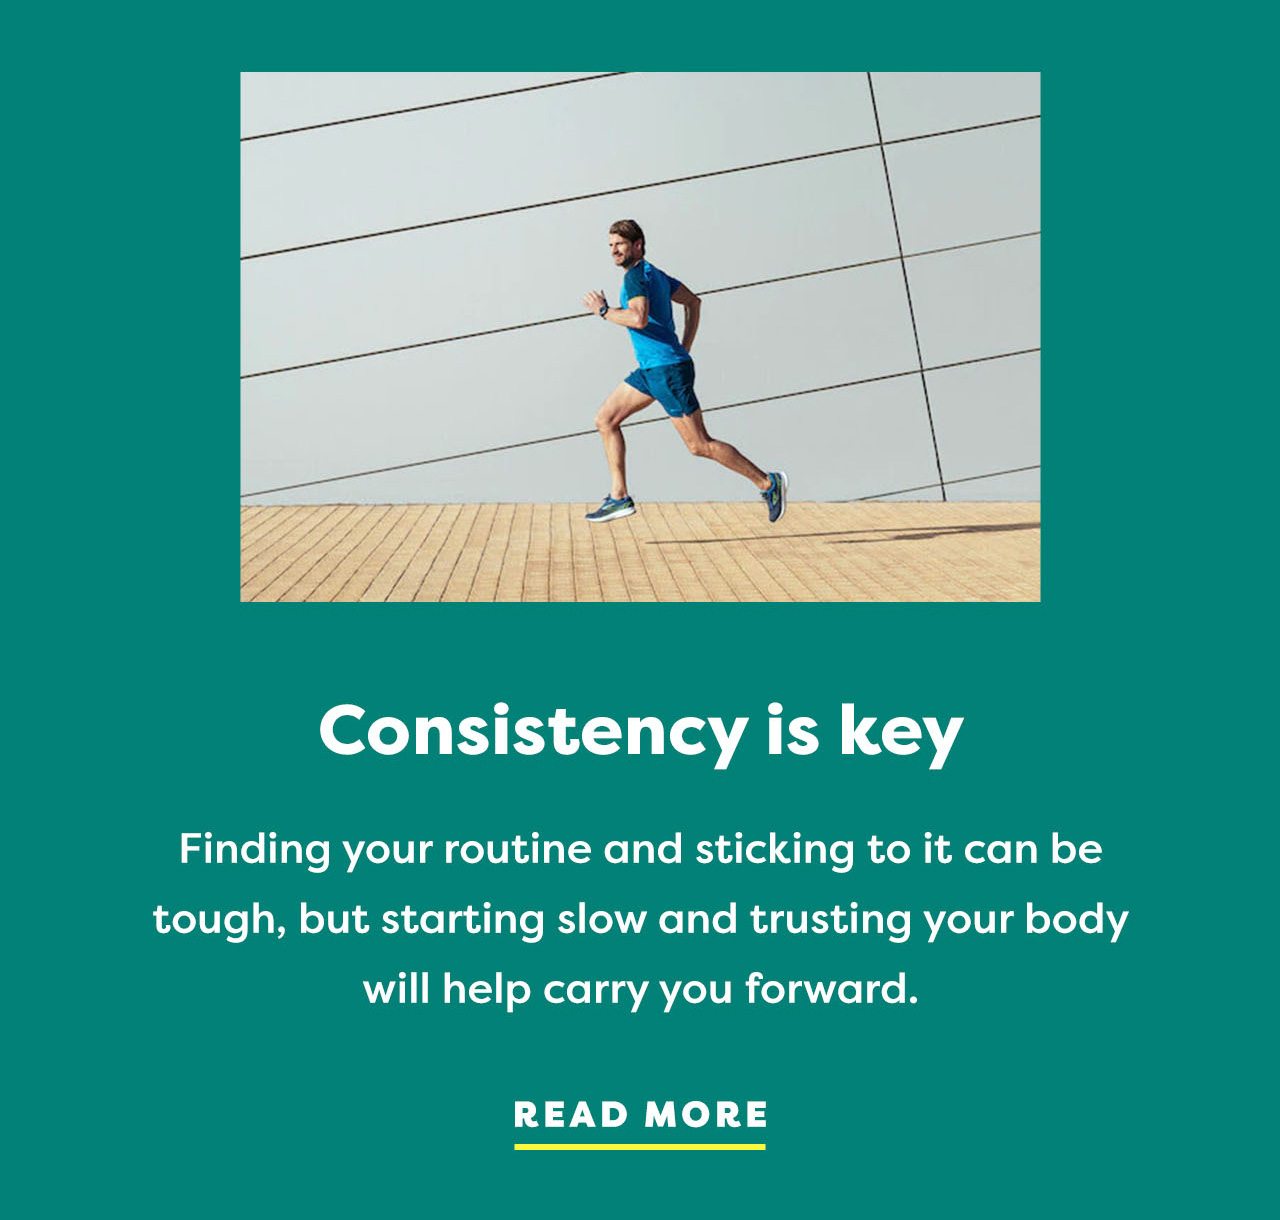 Consistency is key - Finding your routine and sticking to it can be tough, but starting slow and trusting your body will help carry you forward. | Read more